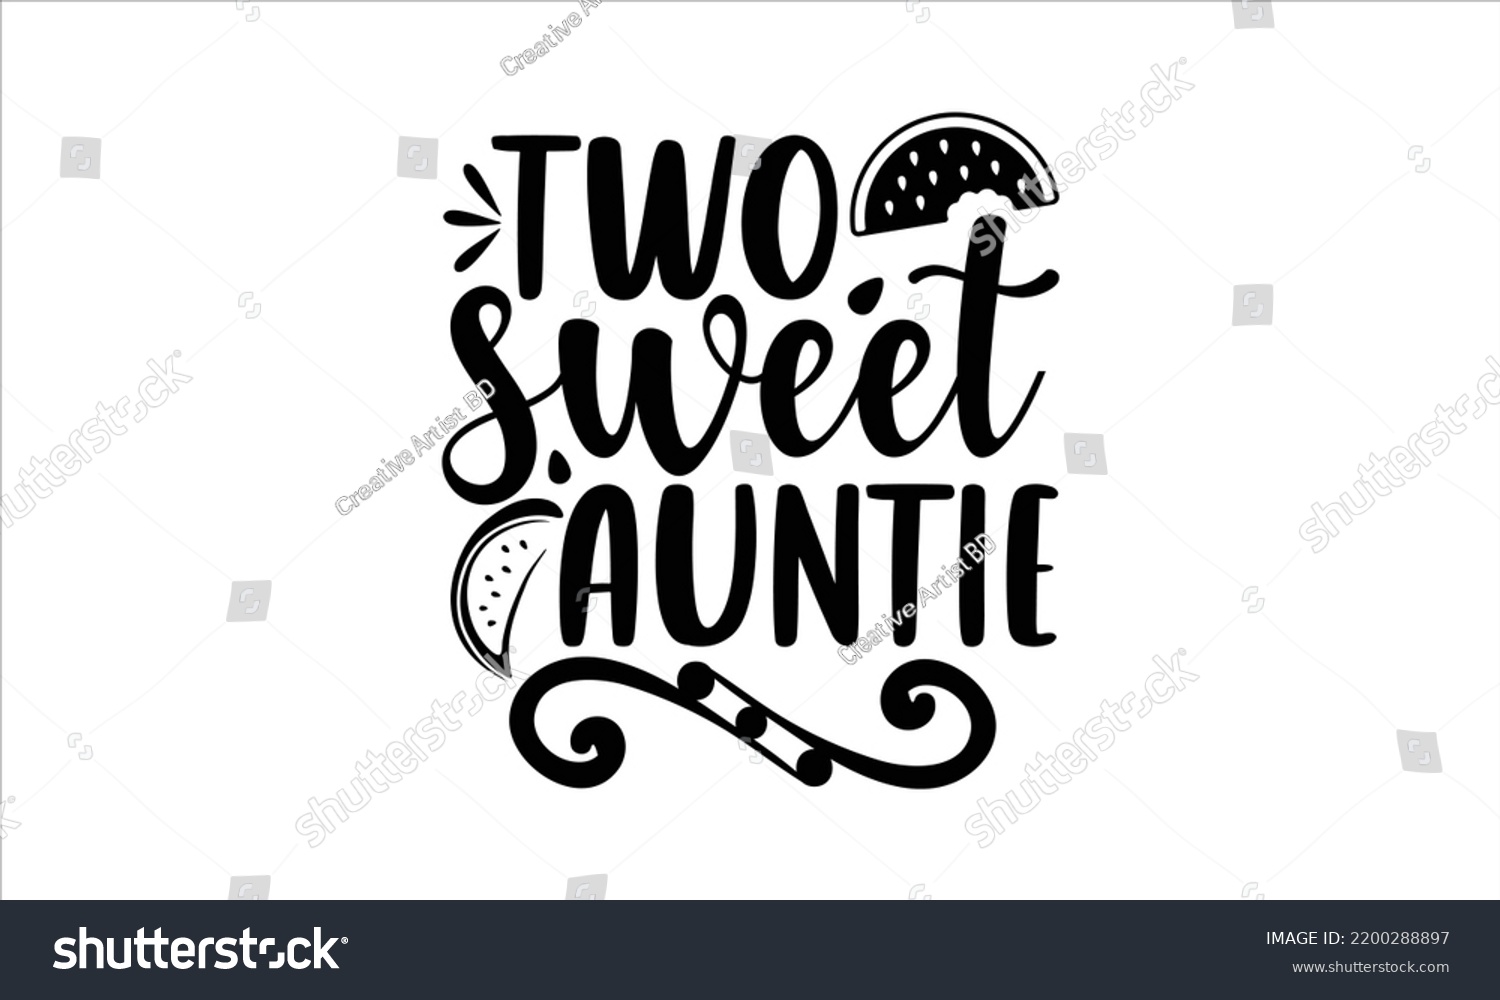 SVG of Two Sweet Auntie - Watermelon T shirt Design, Modern calligraphy, Cut Files for Cricut Svg, Illustration for prints on bags, posters svg